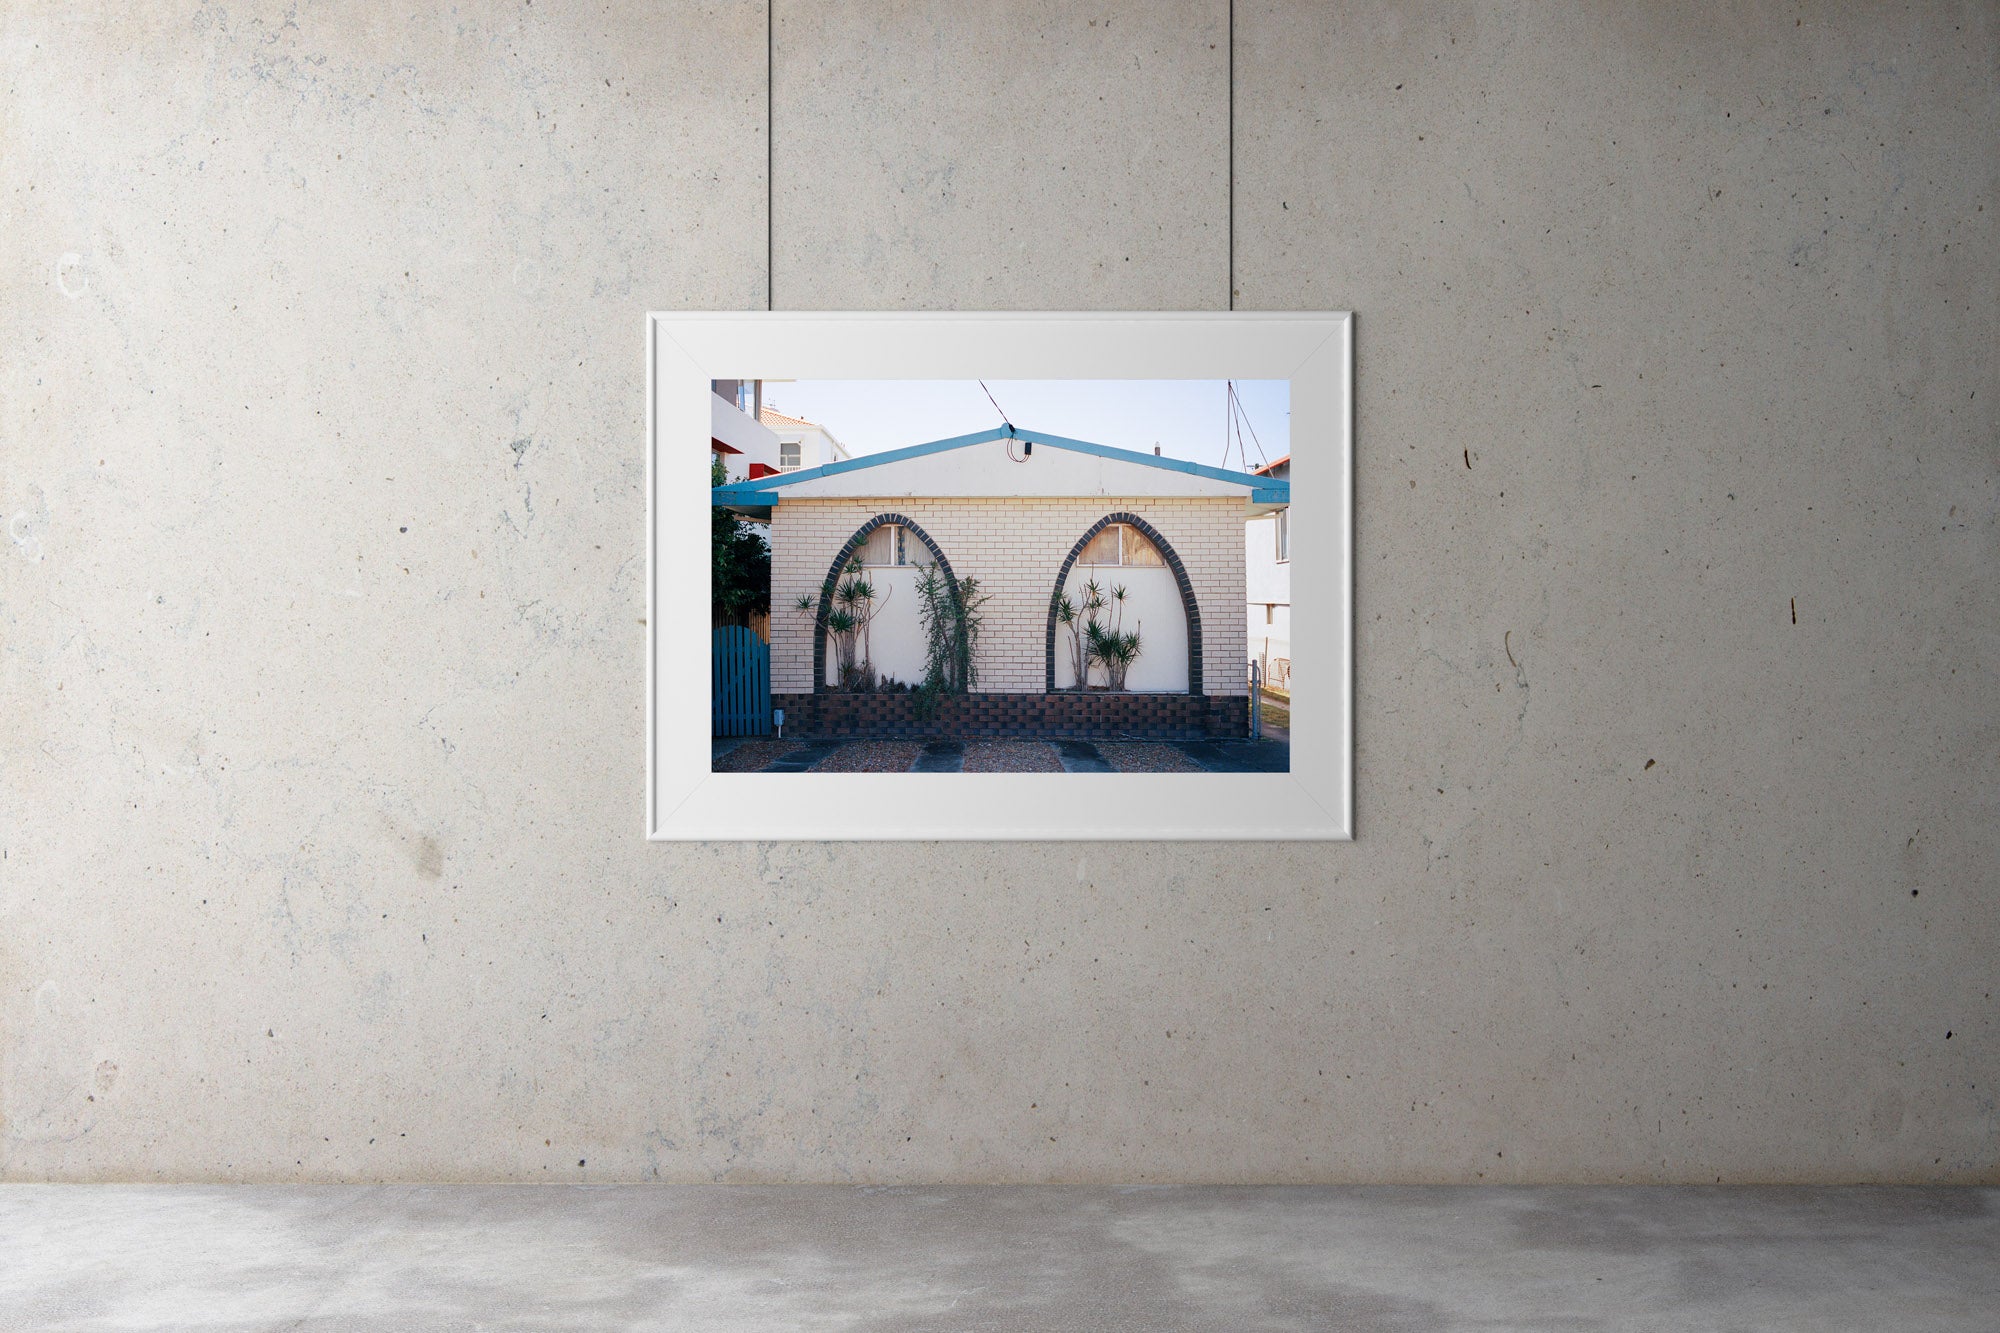 A photograph in a gallery.A photograph is a 1960’s brick retro looking home. Its has two arches with black bricks in a pattern around the arches. There are small plants between the arches. Artwork,